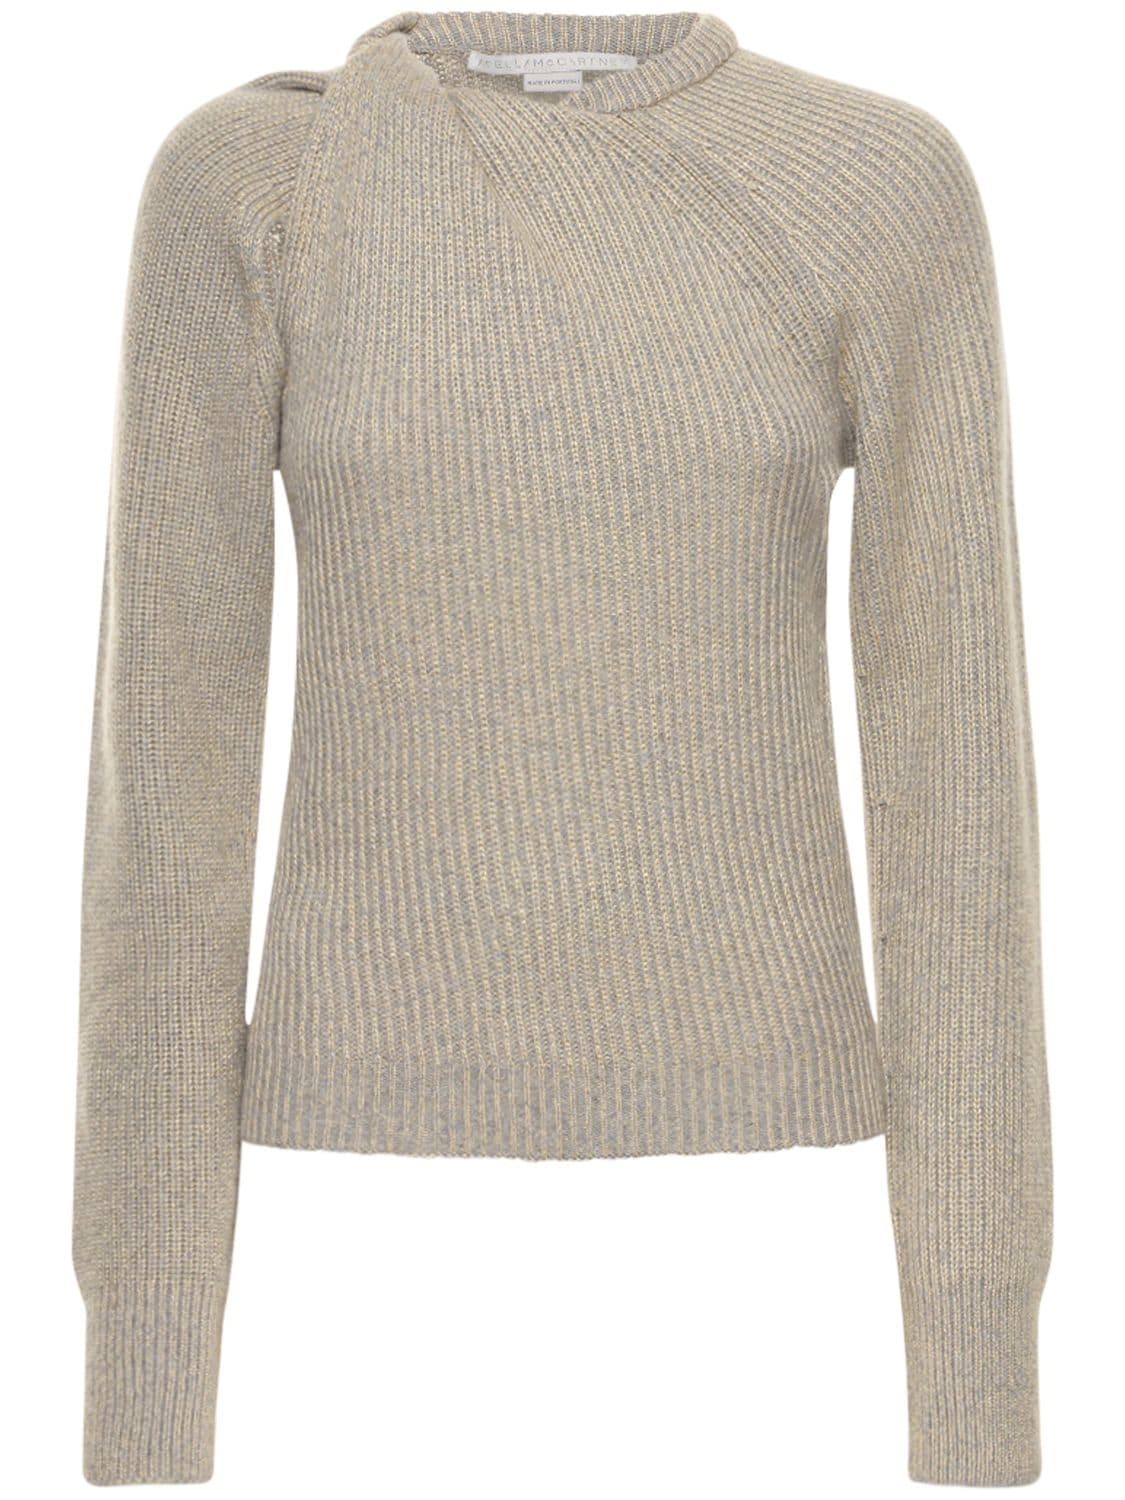 Image of Twisted Cashmere Rib Knit Sweater